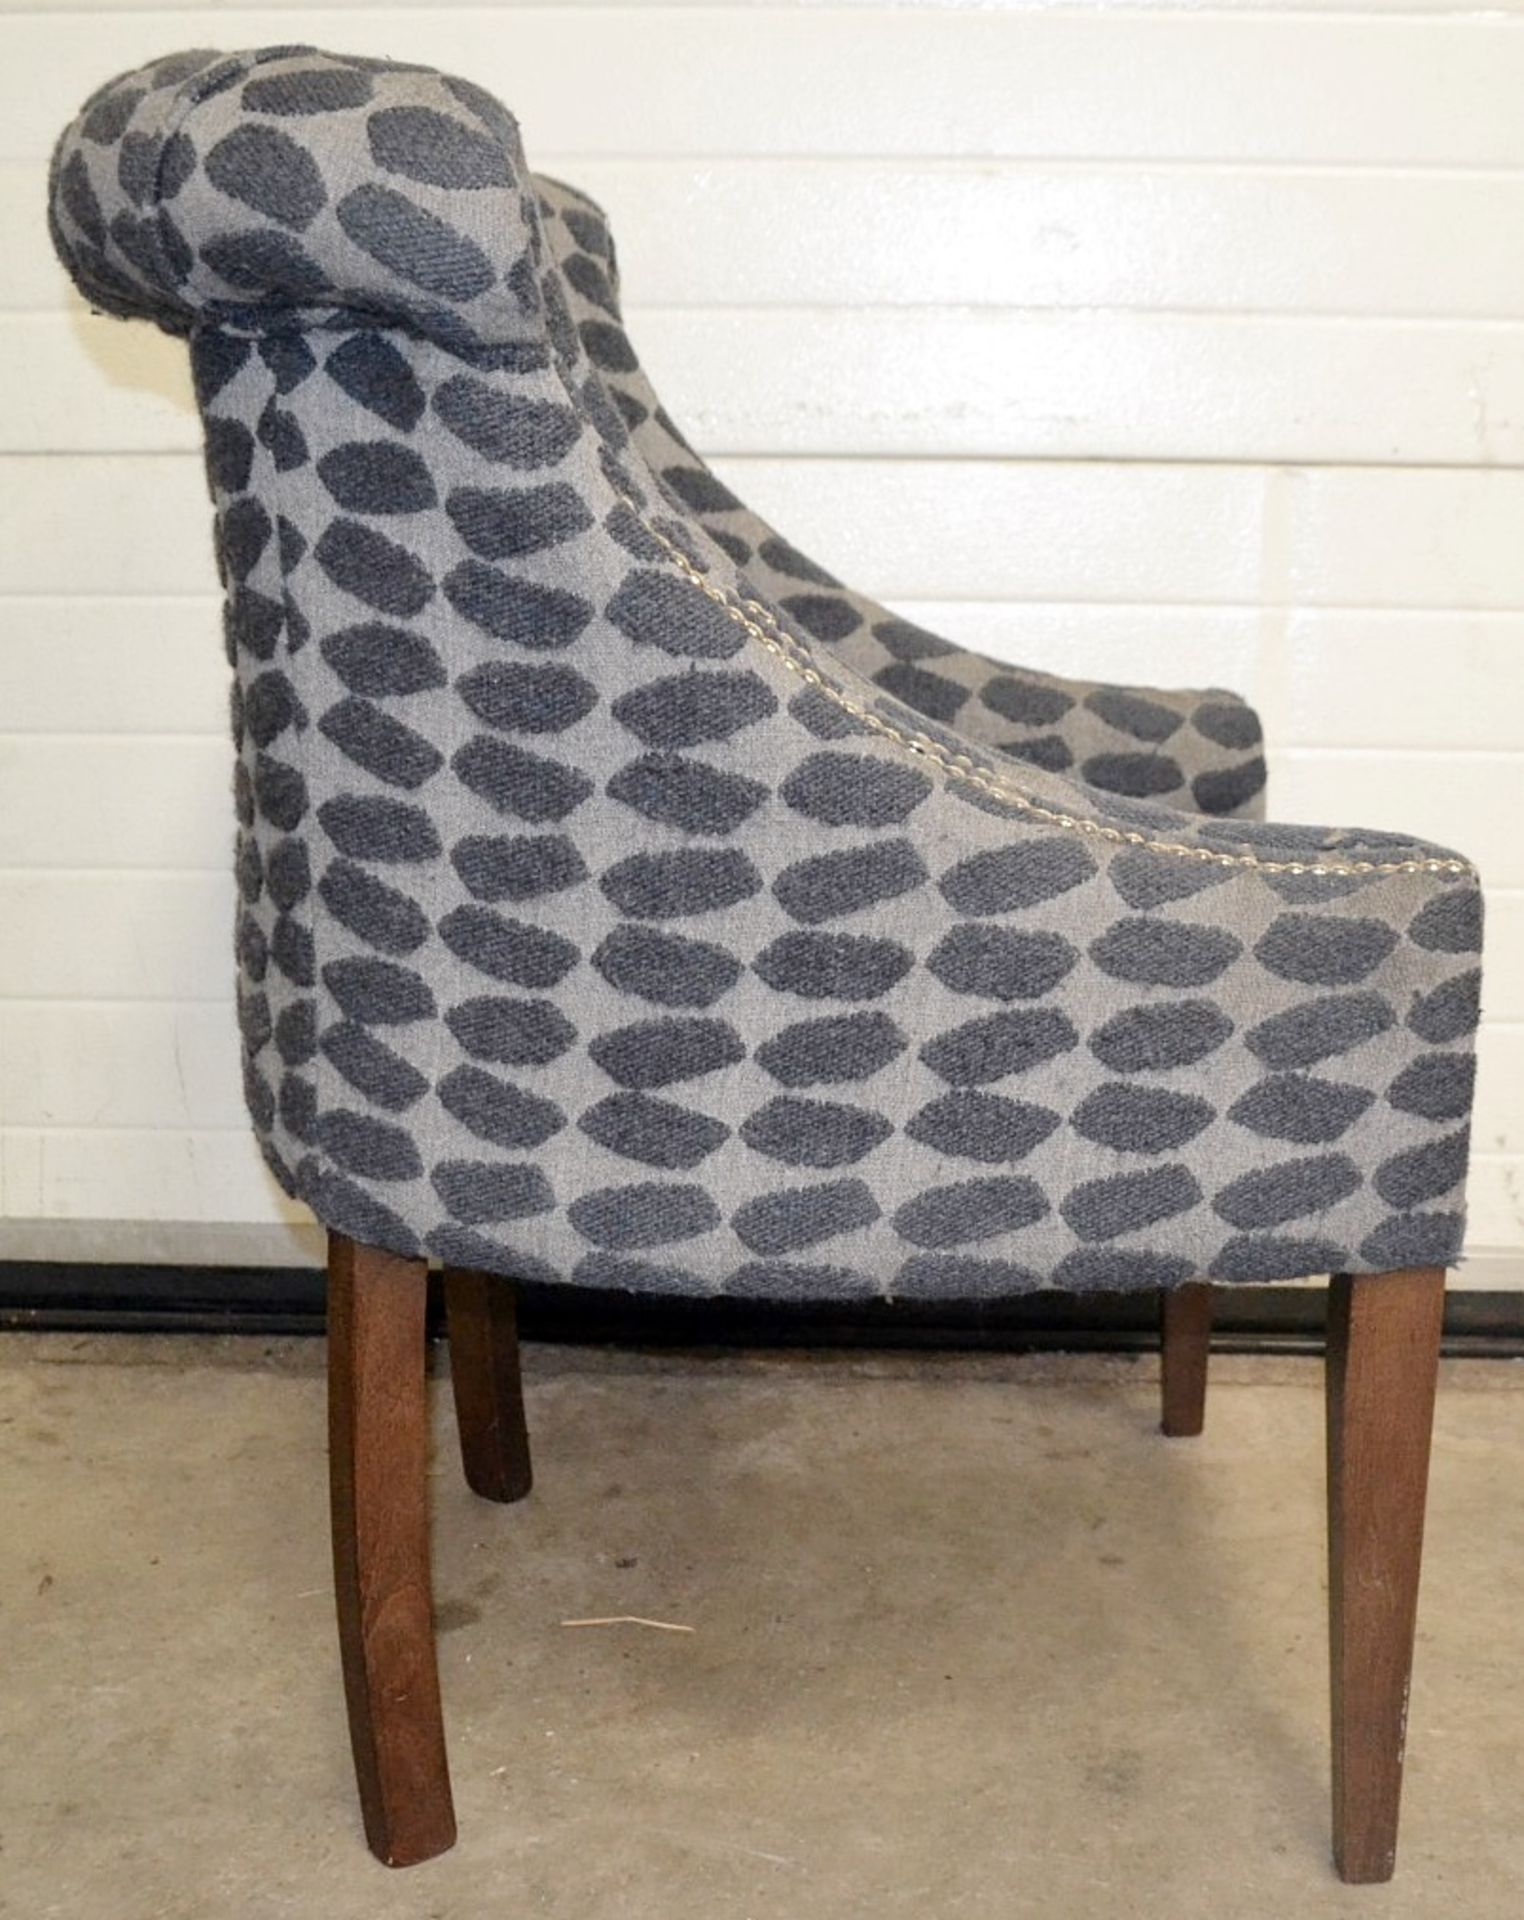 3 x Blue & Grey Upholstered Bar Chairs For Commercial Use - Dimensions (cm): W70 x D60, Back - Image 7 of 7